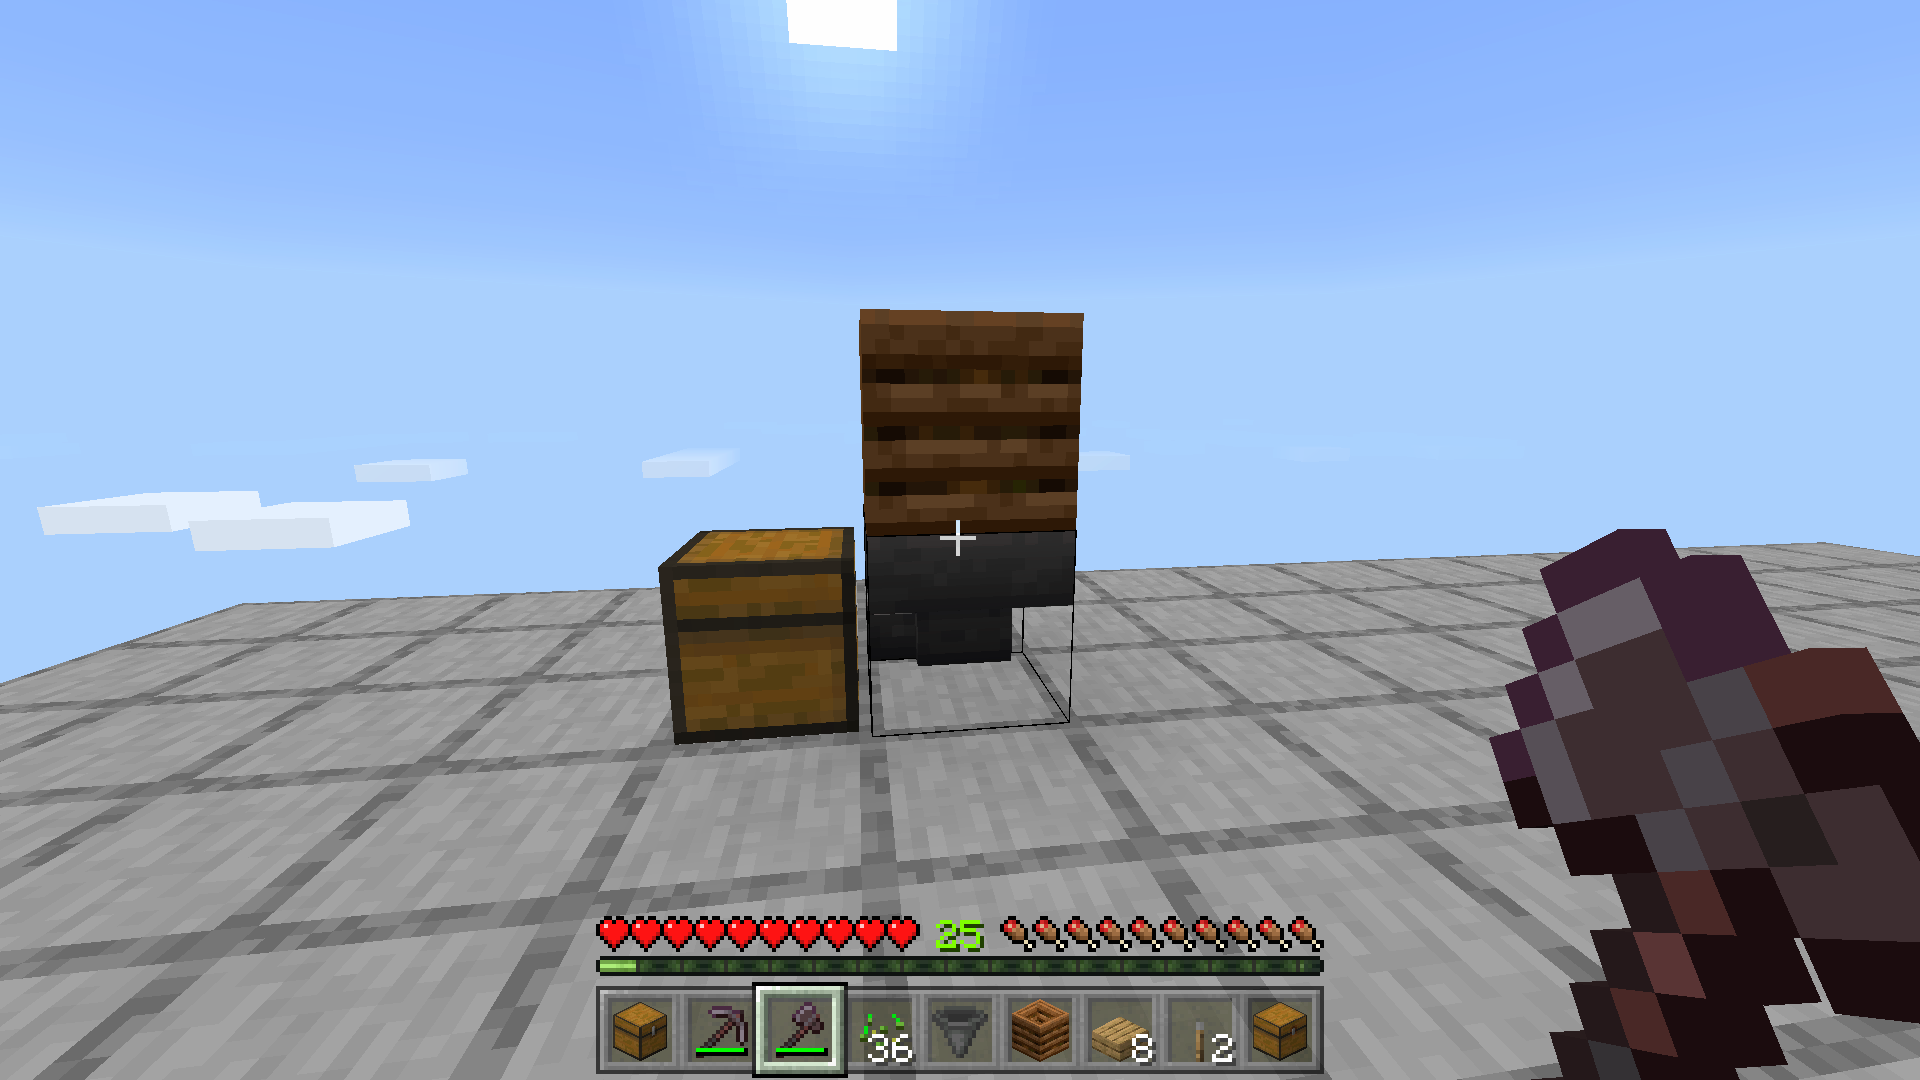 How To Make A Composter In Minecraft